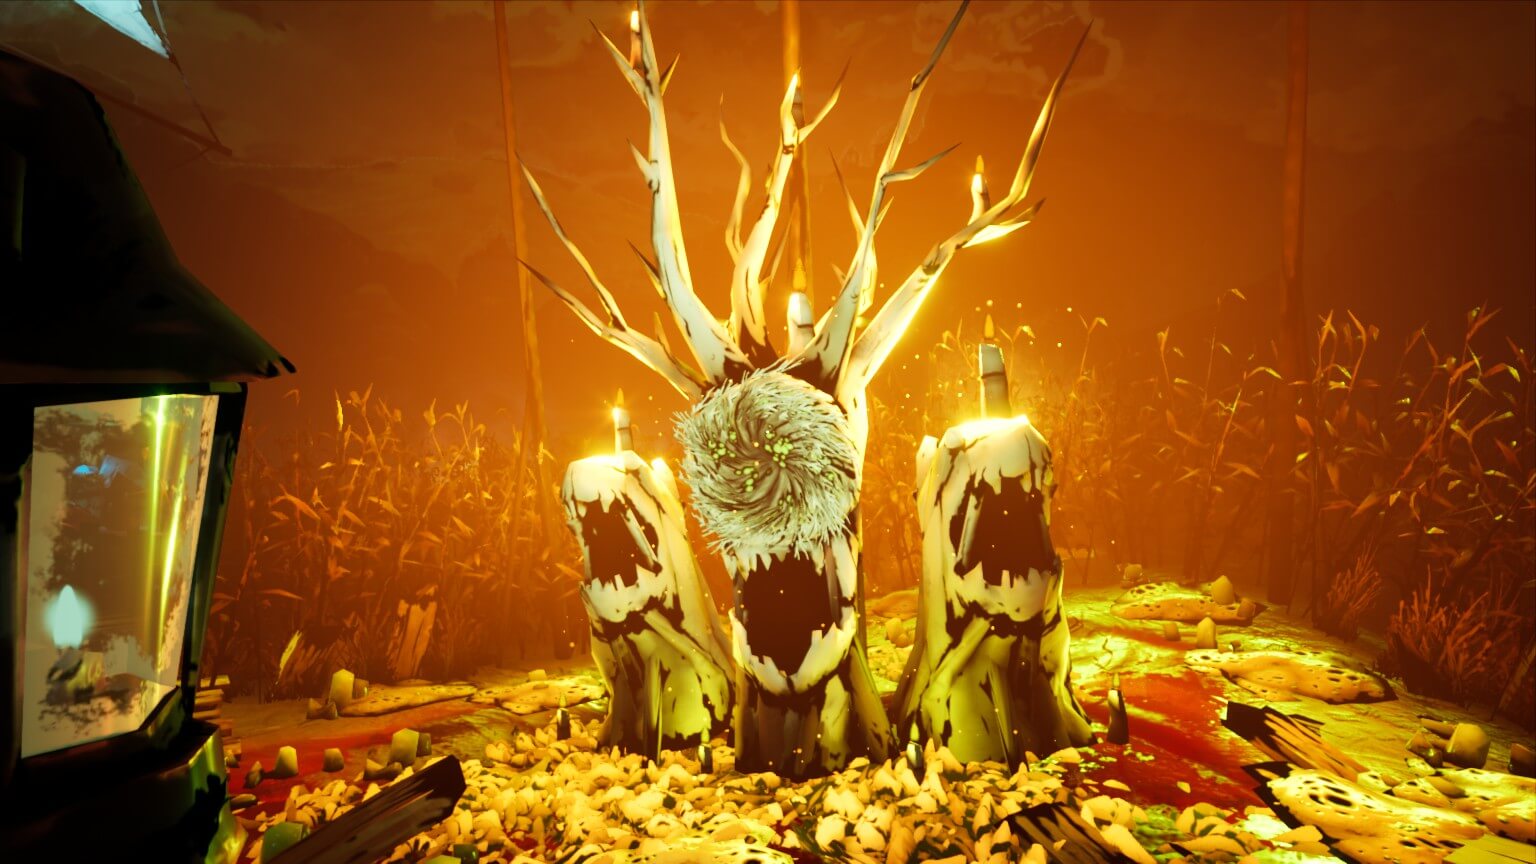 The effigy that the player uses to banish the creature. Each mouth can hold one fragment and lies in the middle of the field somewhere. The left screen has my lantern with a dim flame. 